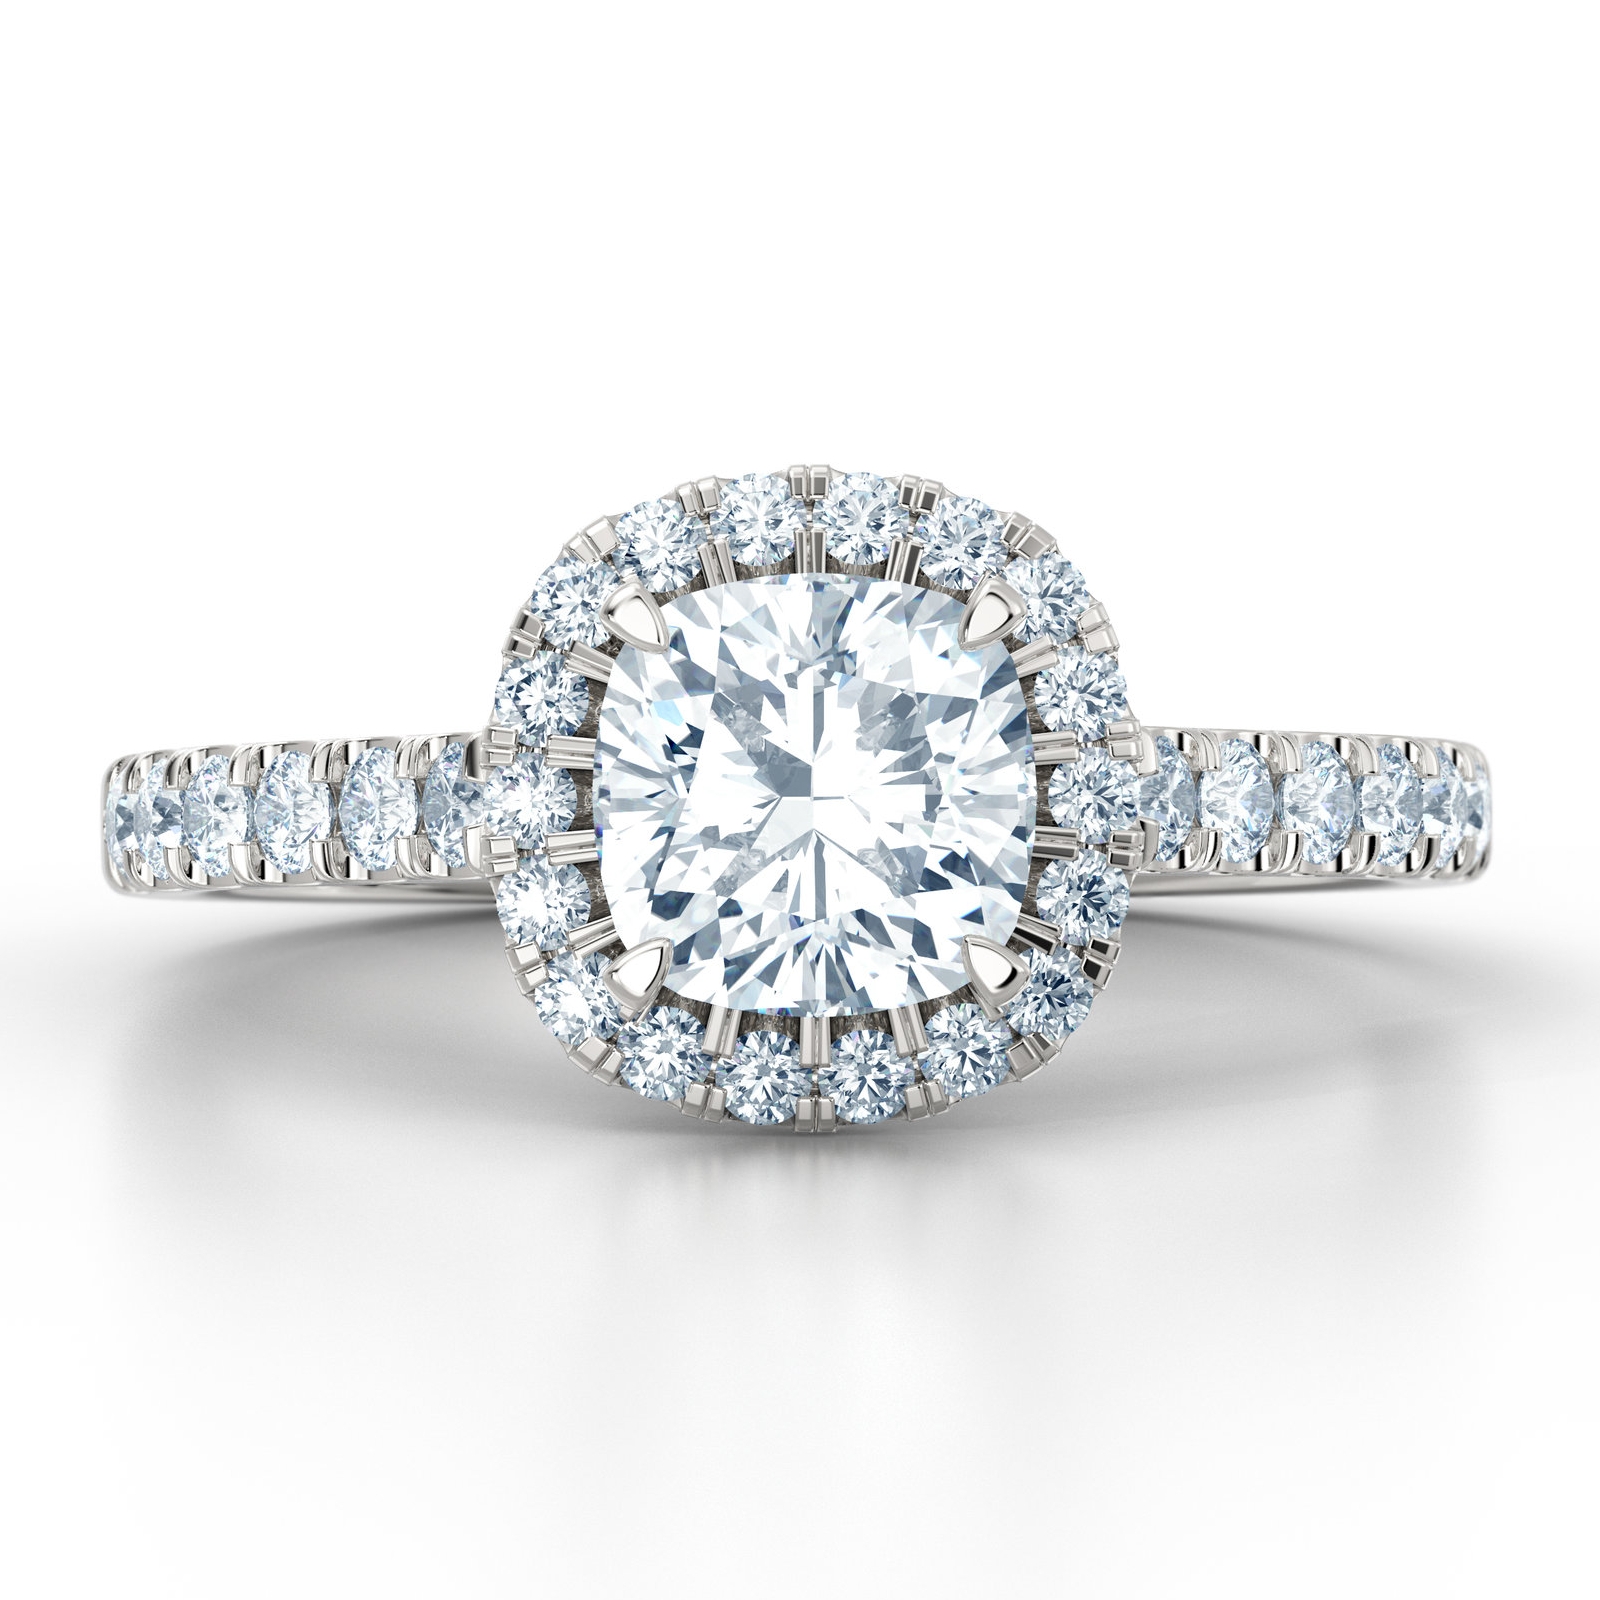 Choosing the right Metal for your Engagement Ring | Love Fine Diamonds